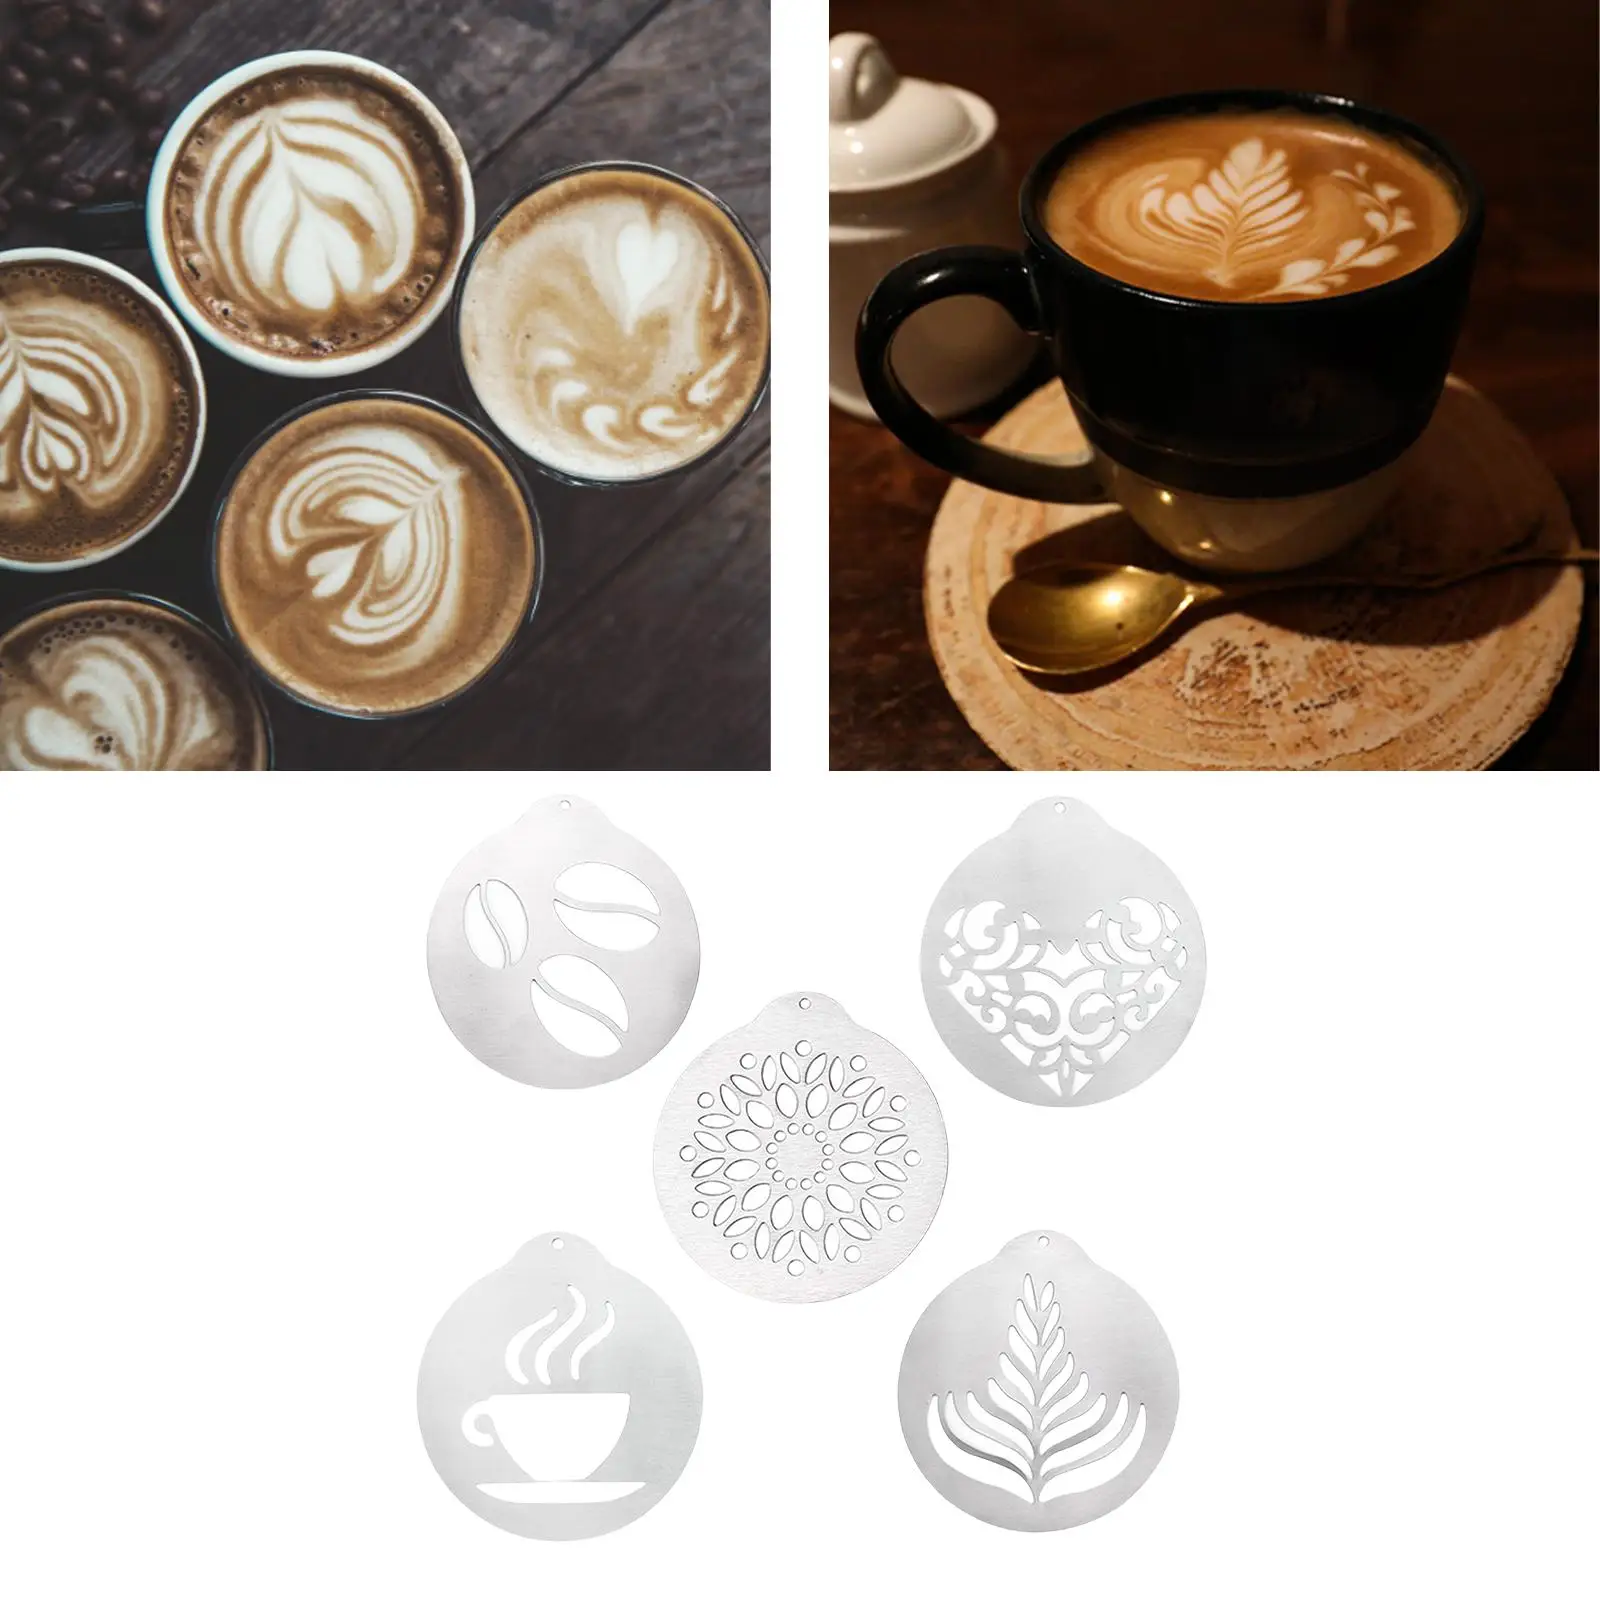 5x Stainless Steel Coffee Latte Stencils Cake Decorating Tool Barista Anti Rust Templates for Home Kitchen Baking